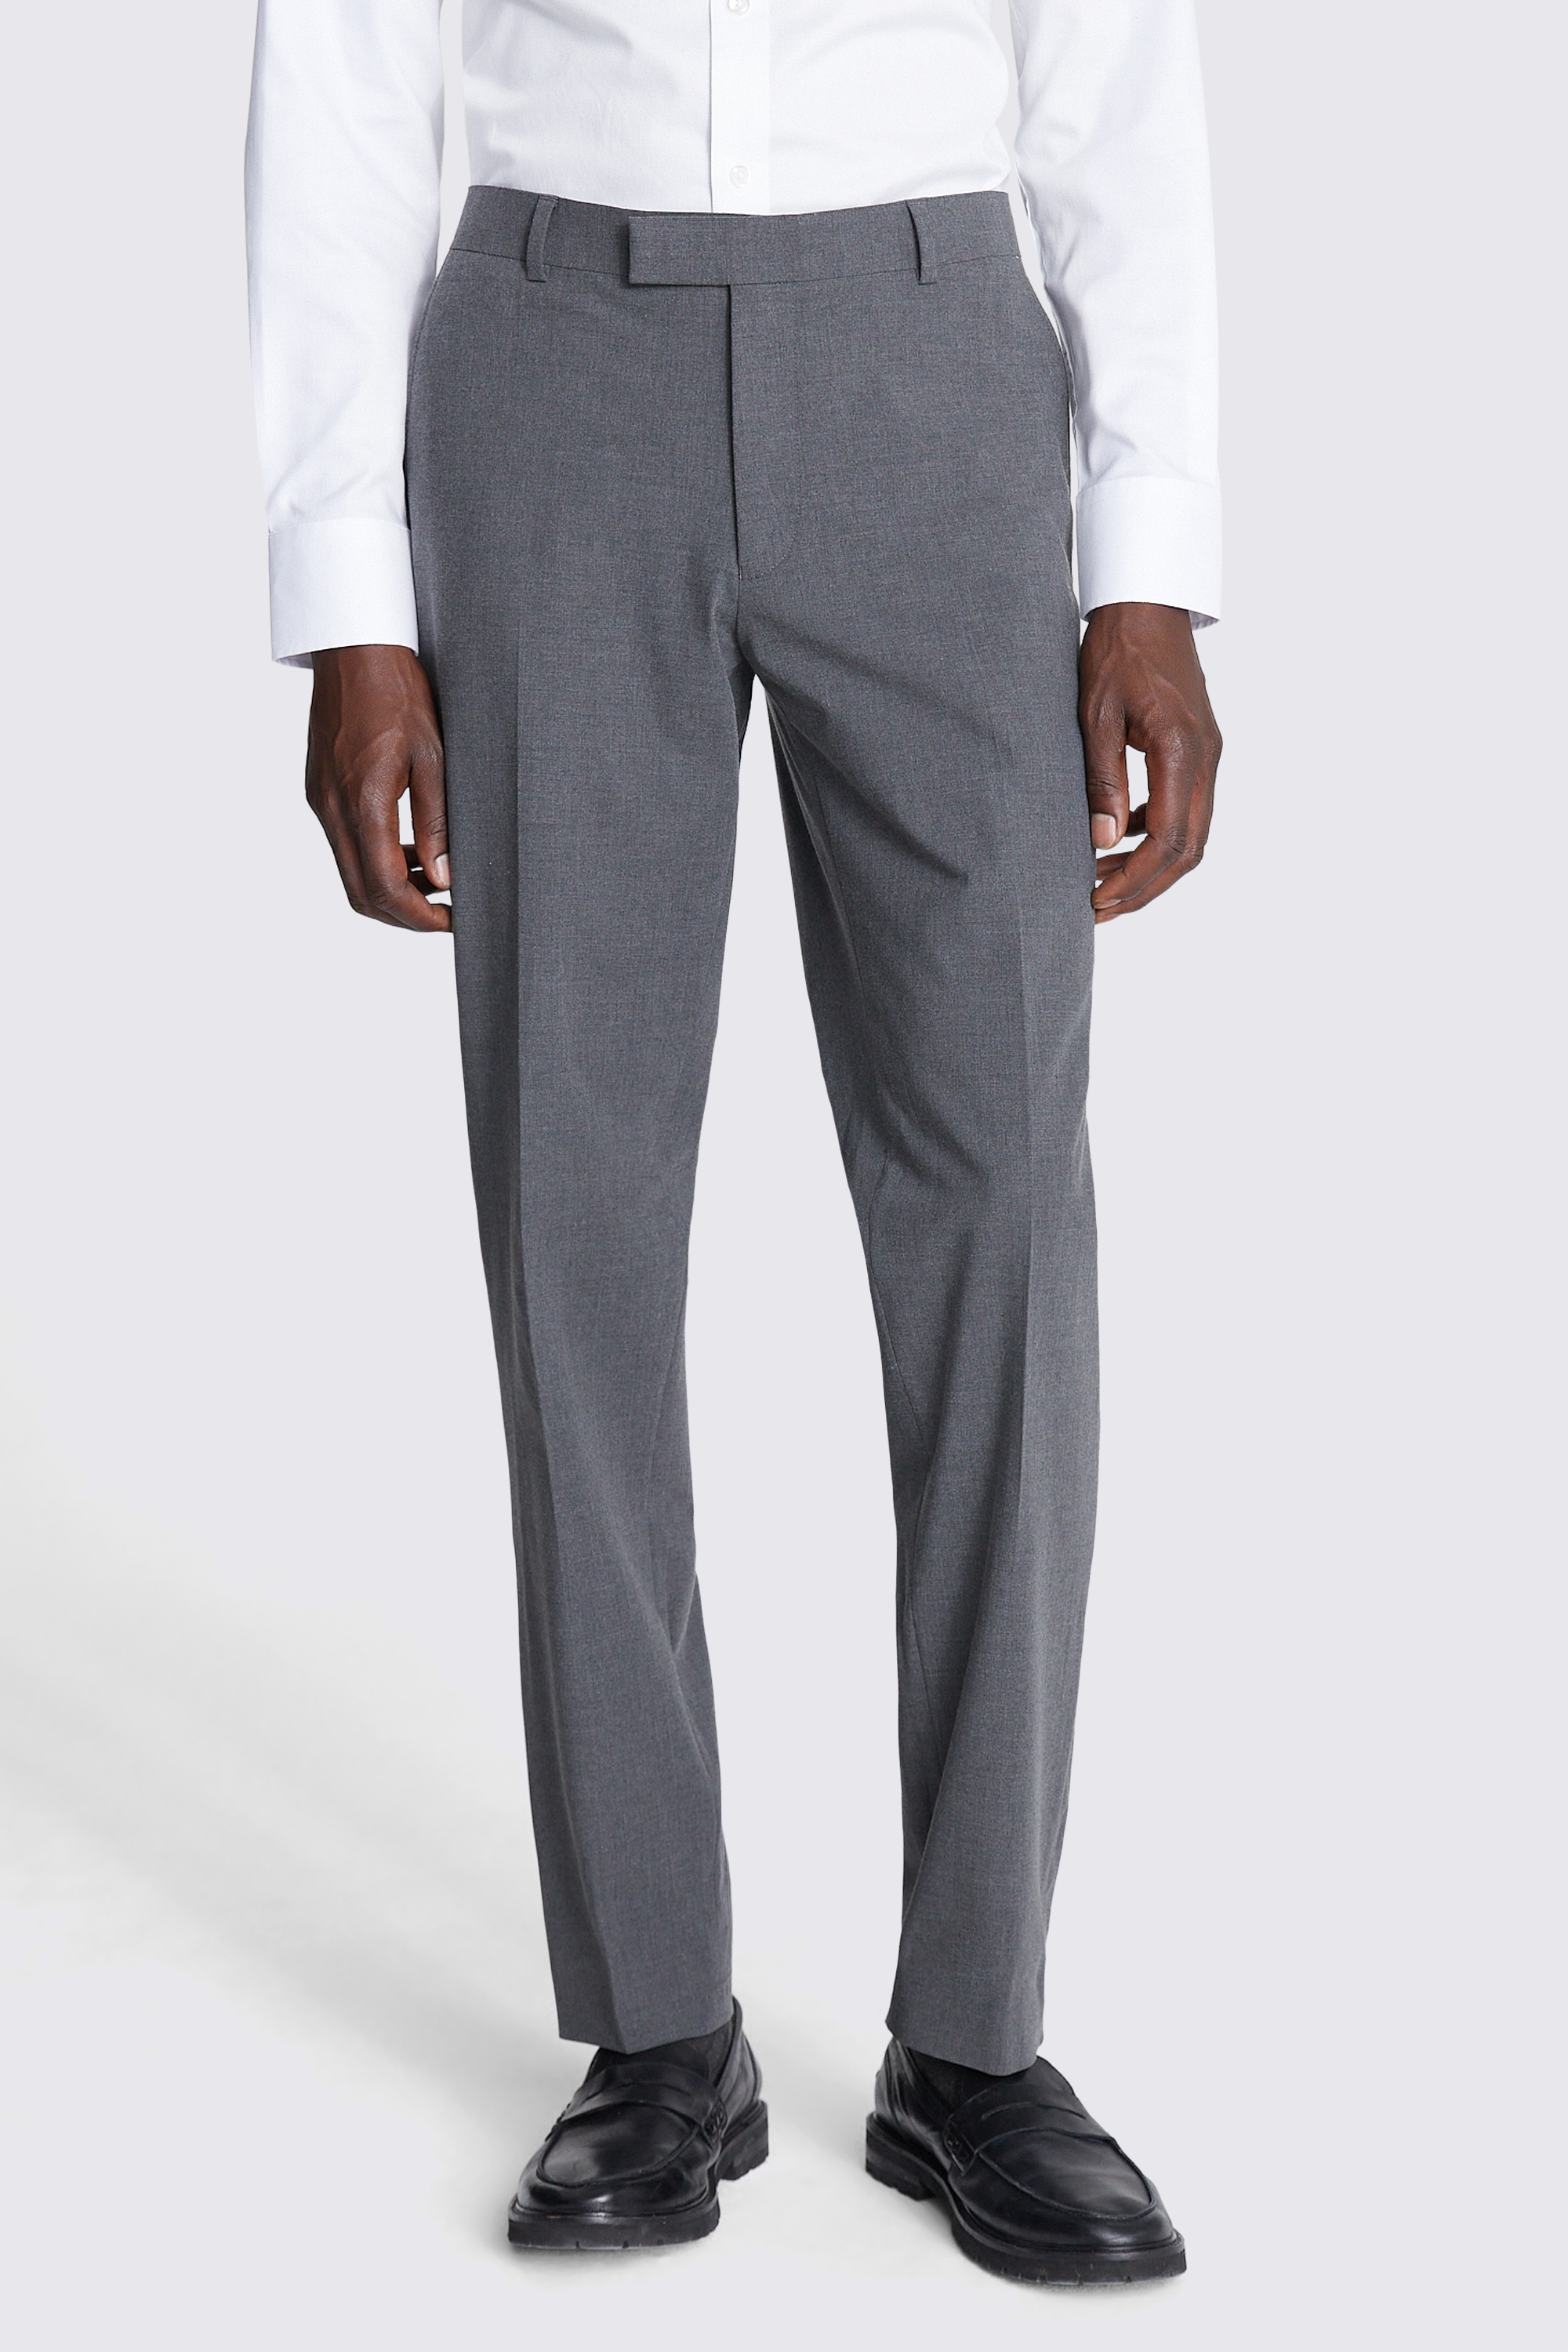 Slim Fit Grey Trousers | Buy Online at Moss